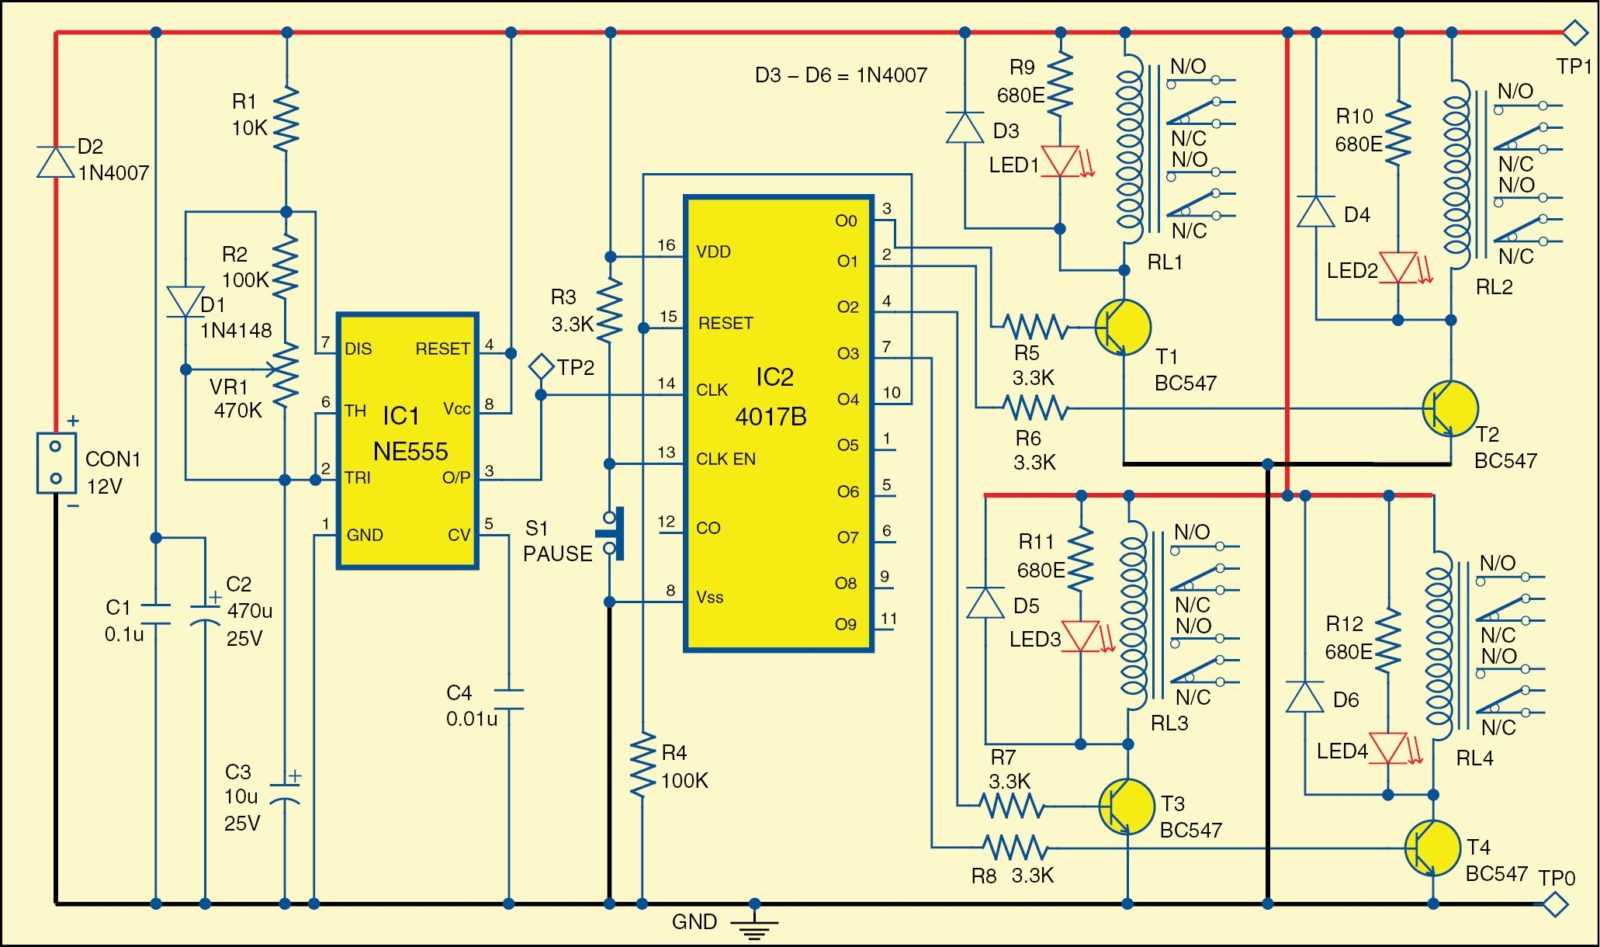 Circuit diagram of the four-channel video and audio sequencer